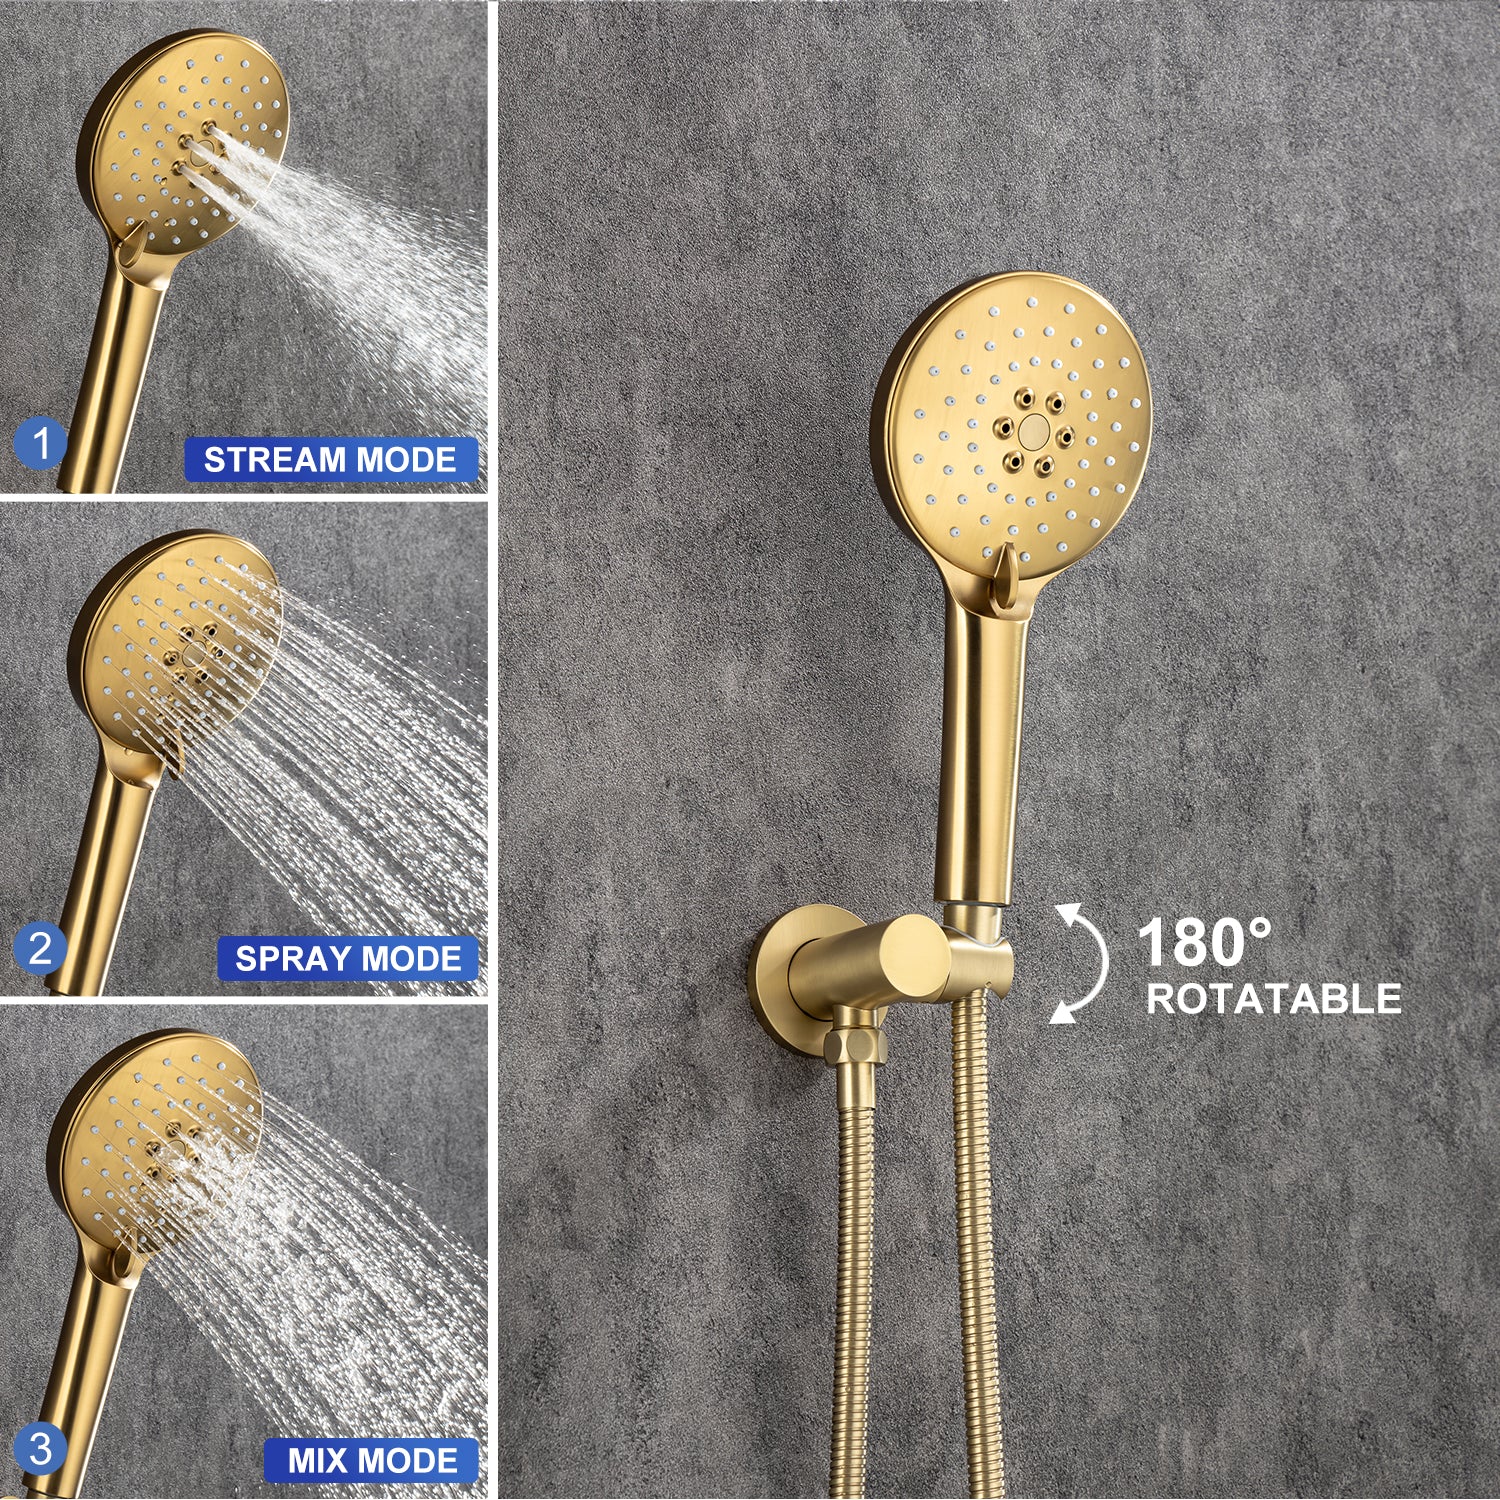 10" Shower Head 2-way Ceiling-Mount Round Shower Faucet with Rough-in Valve RX96205-10